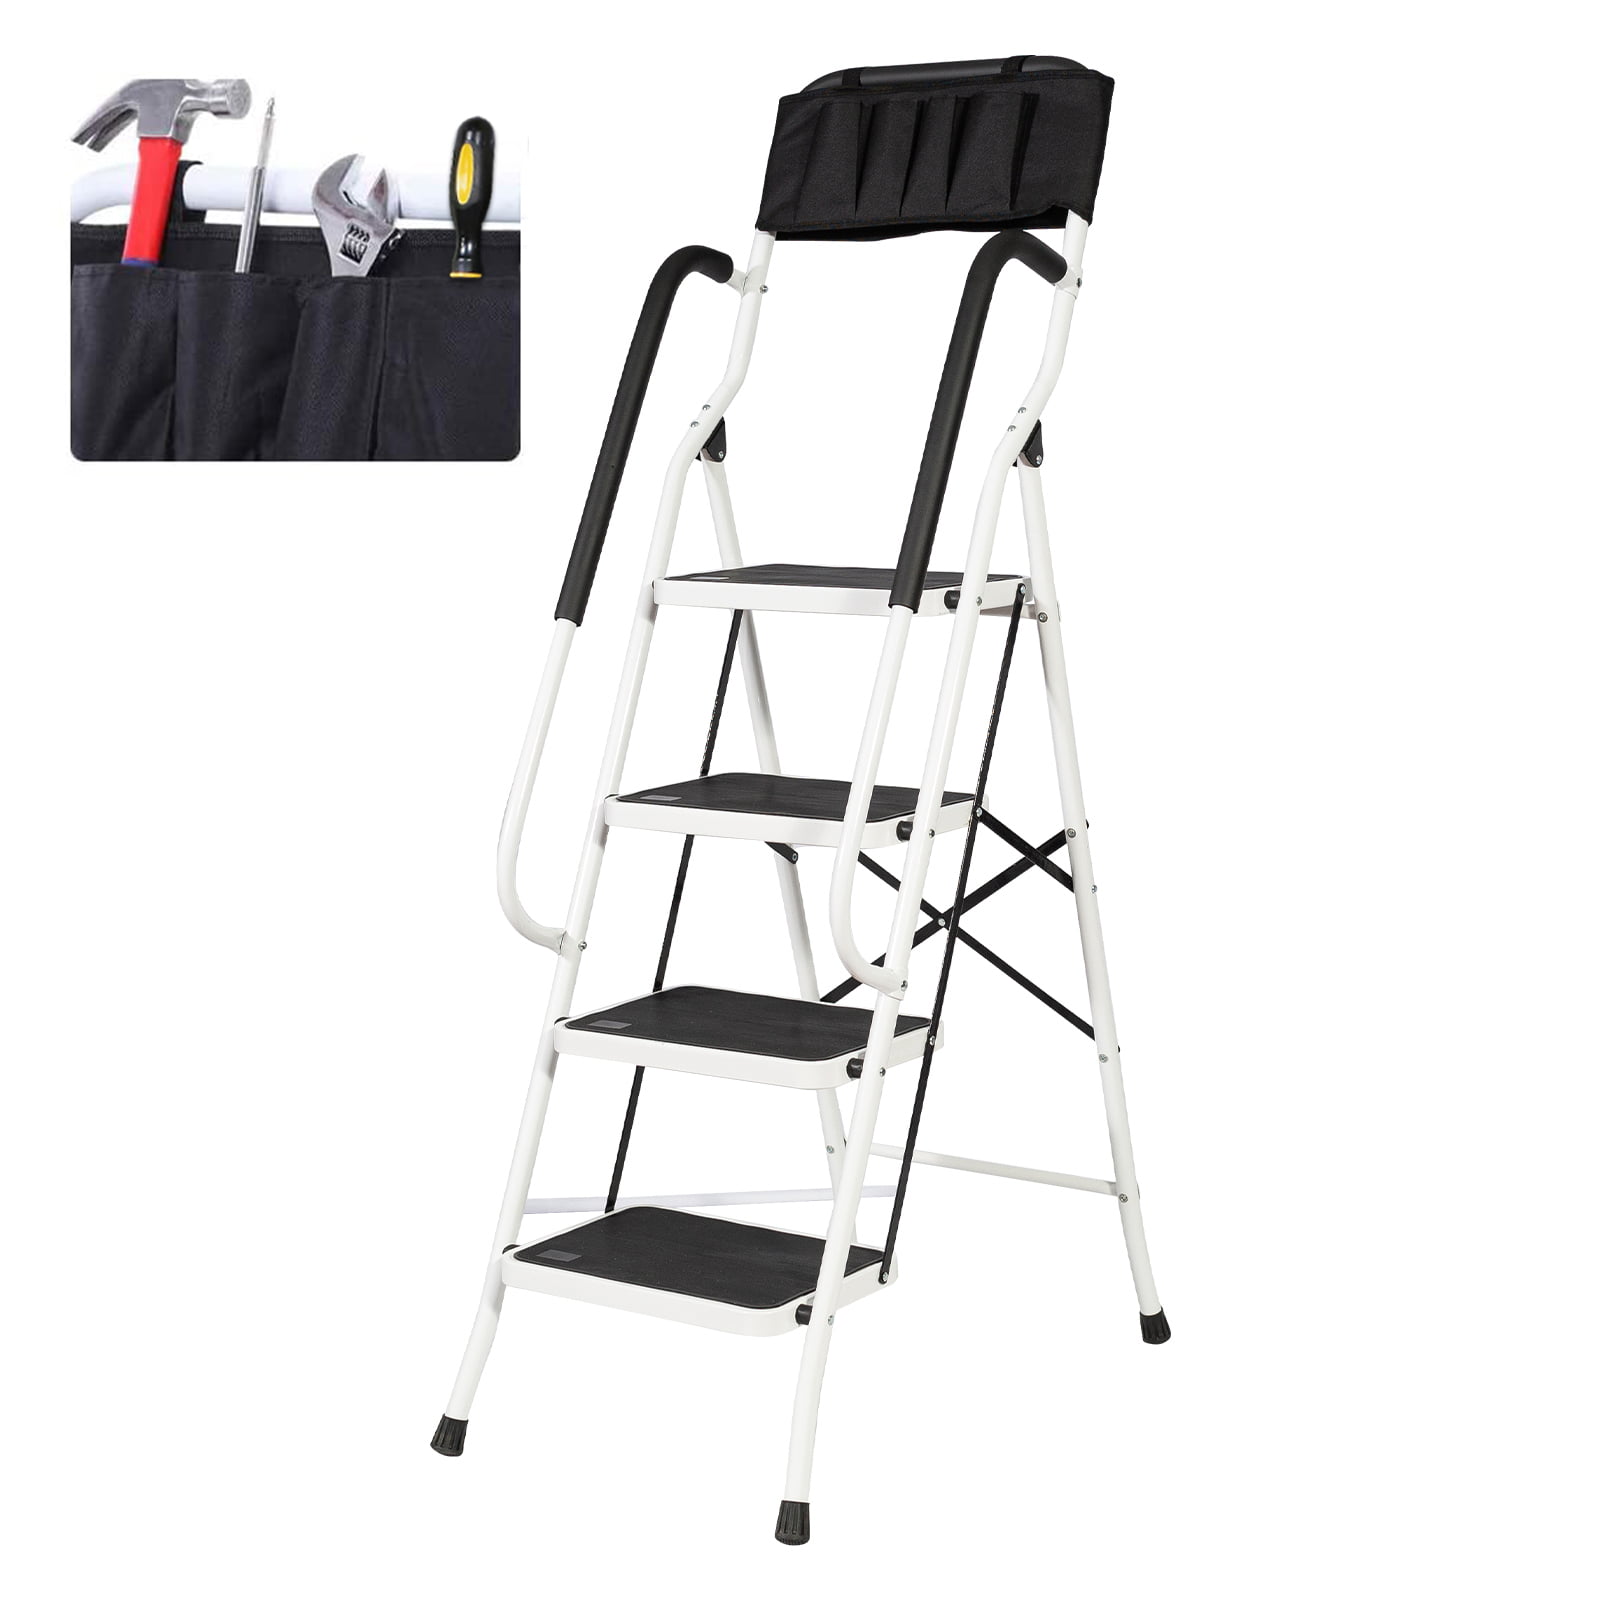 500 Lbs Heavy Duty Step Ladder for Adults Fully Assembled Lightweight /& Portable Steel Step Stool Folding Step Stool with Anti-Slip Pedal Red /& Black 4 Step Ladder for Home /& Kitchen